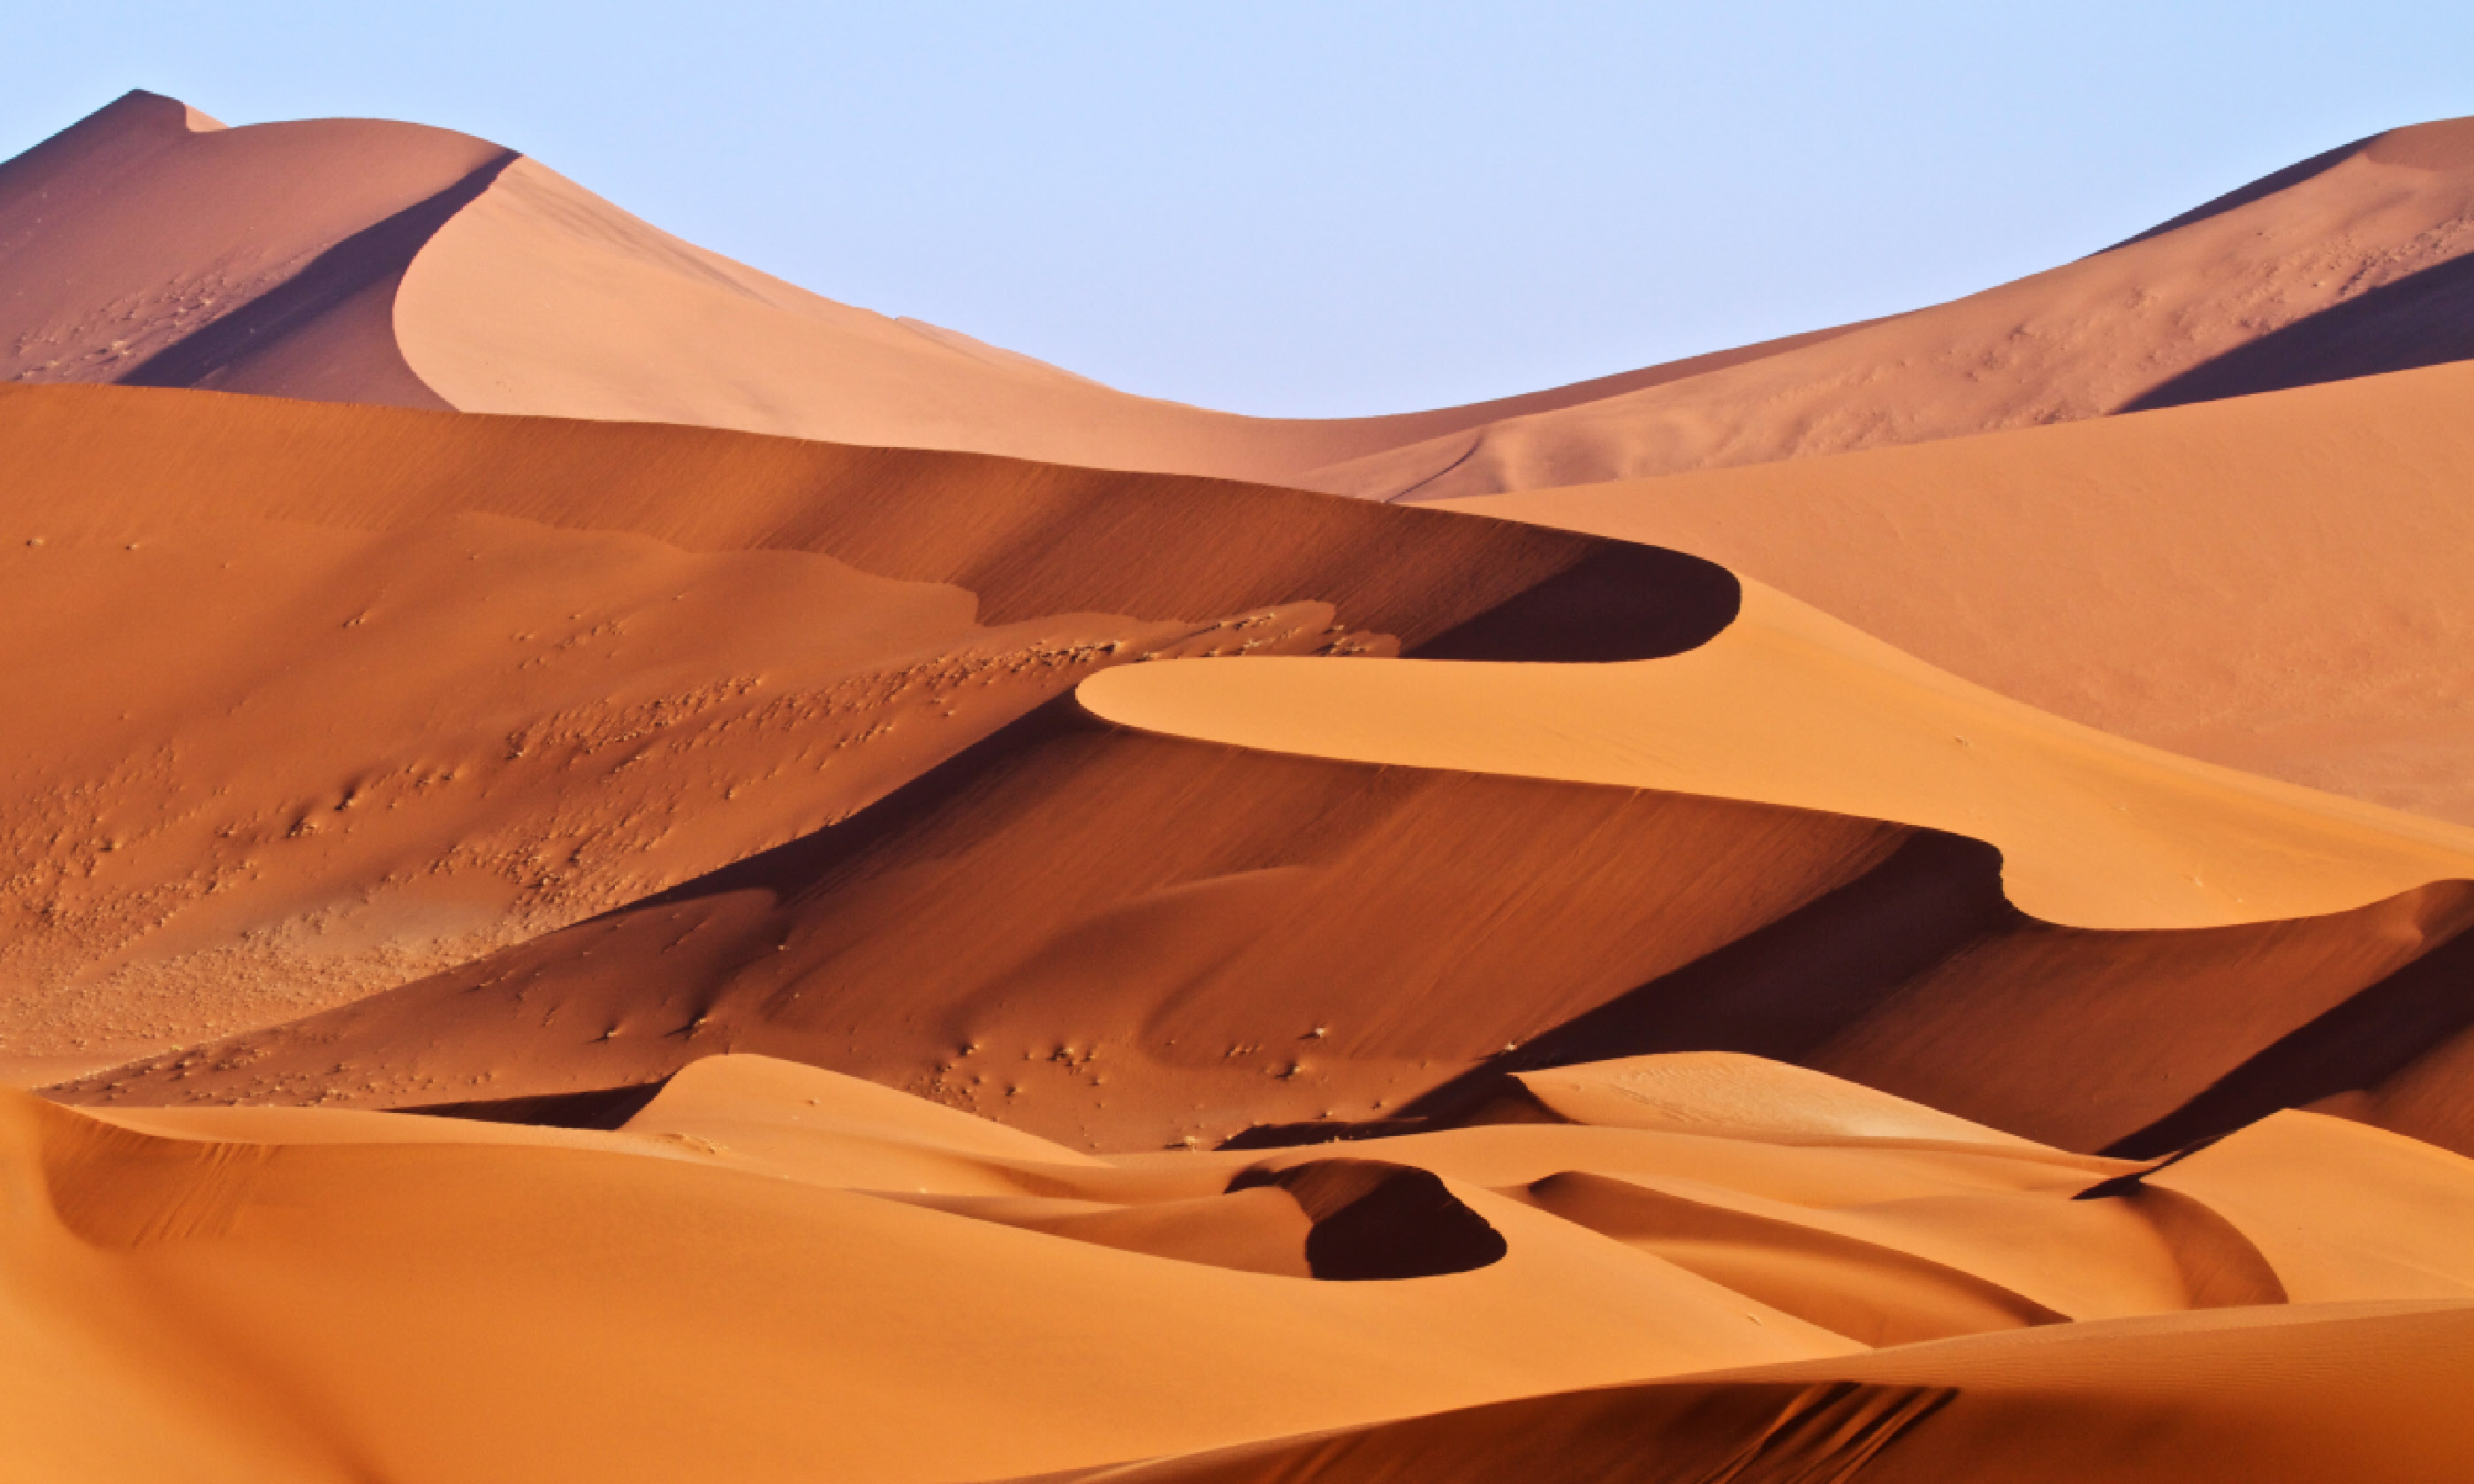 Red sand dunes, Namibia (Shutterstock)